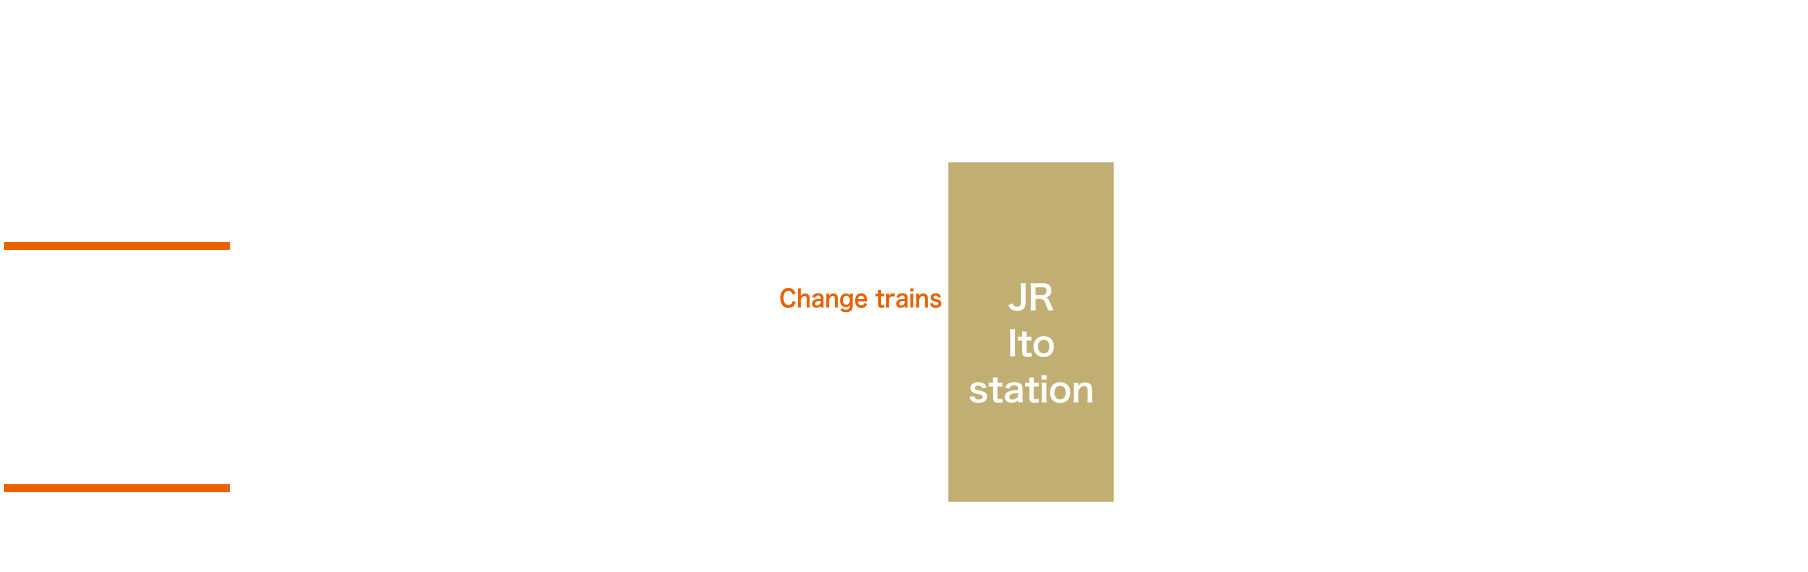 How to get here by train